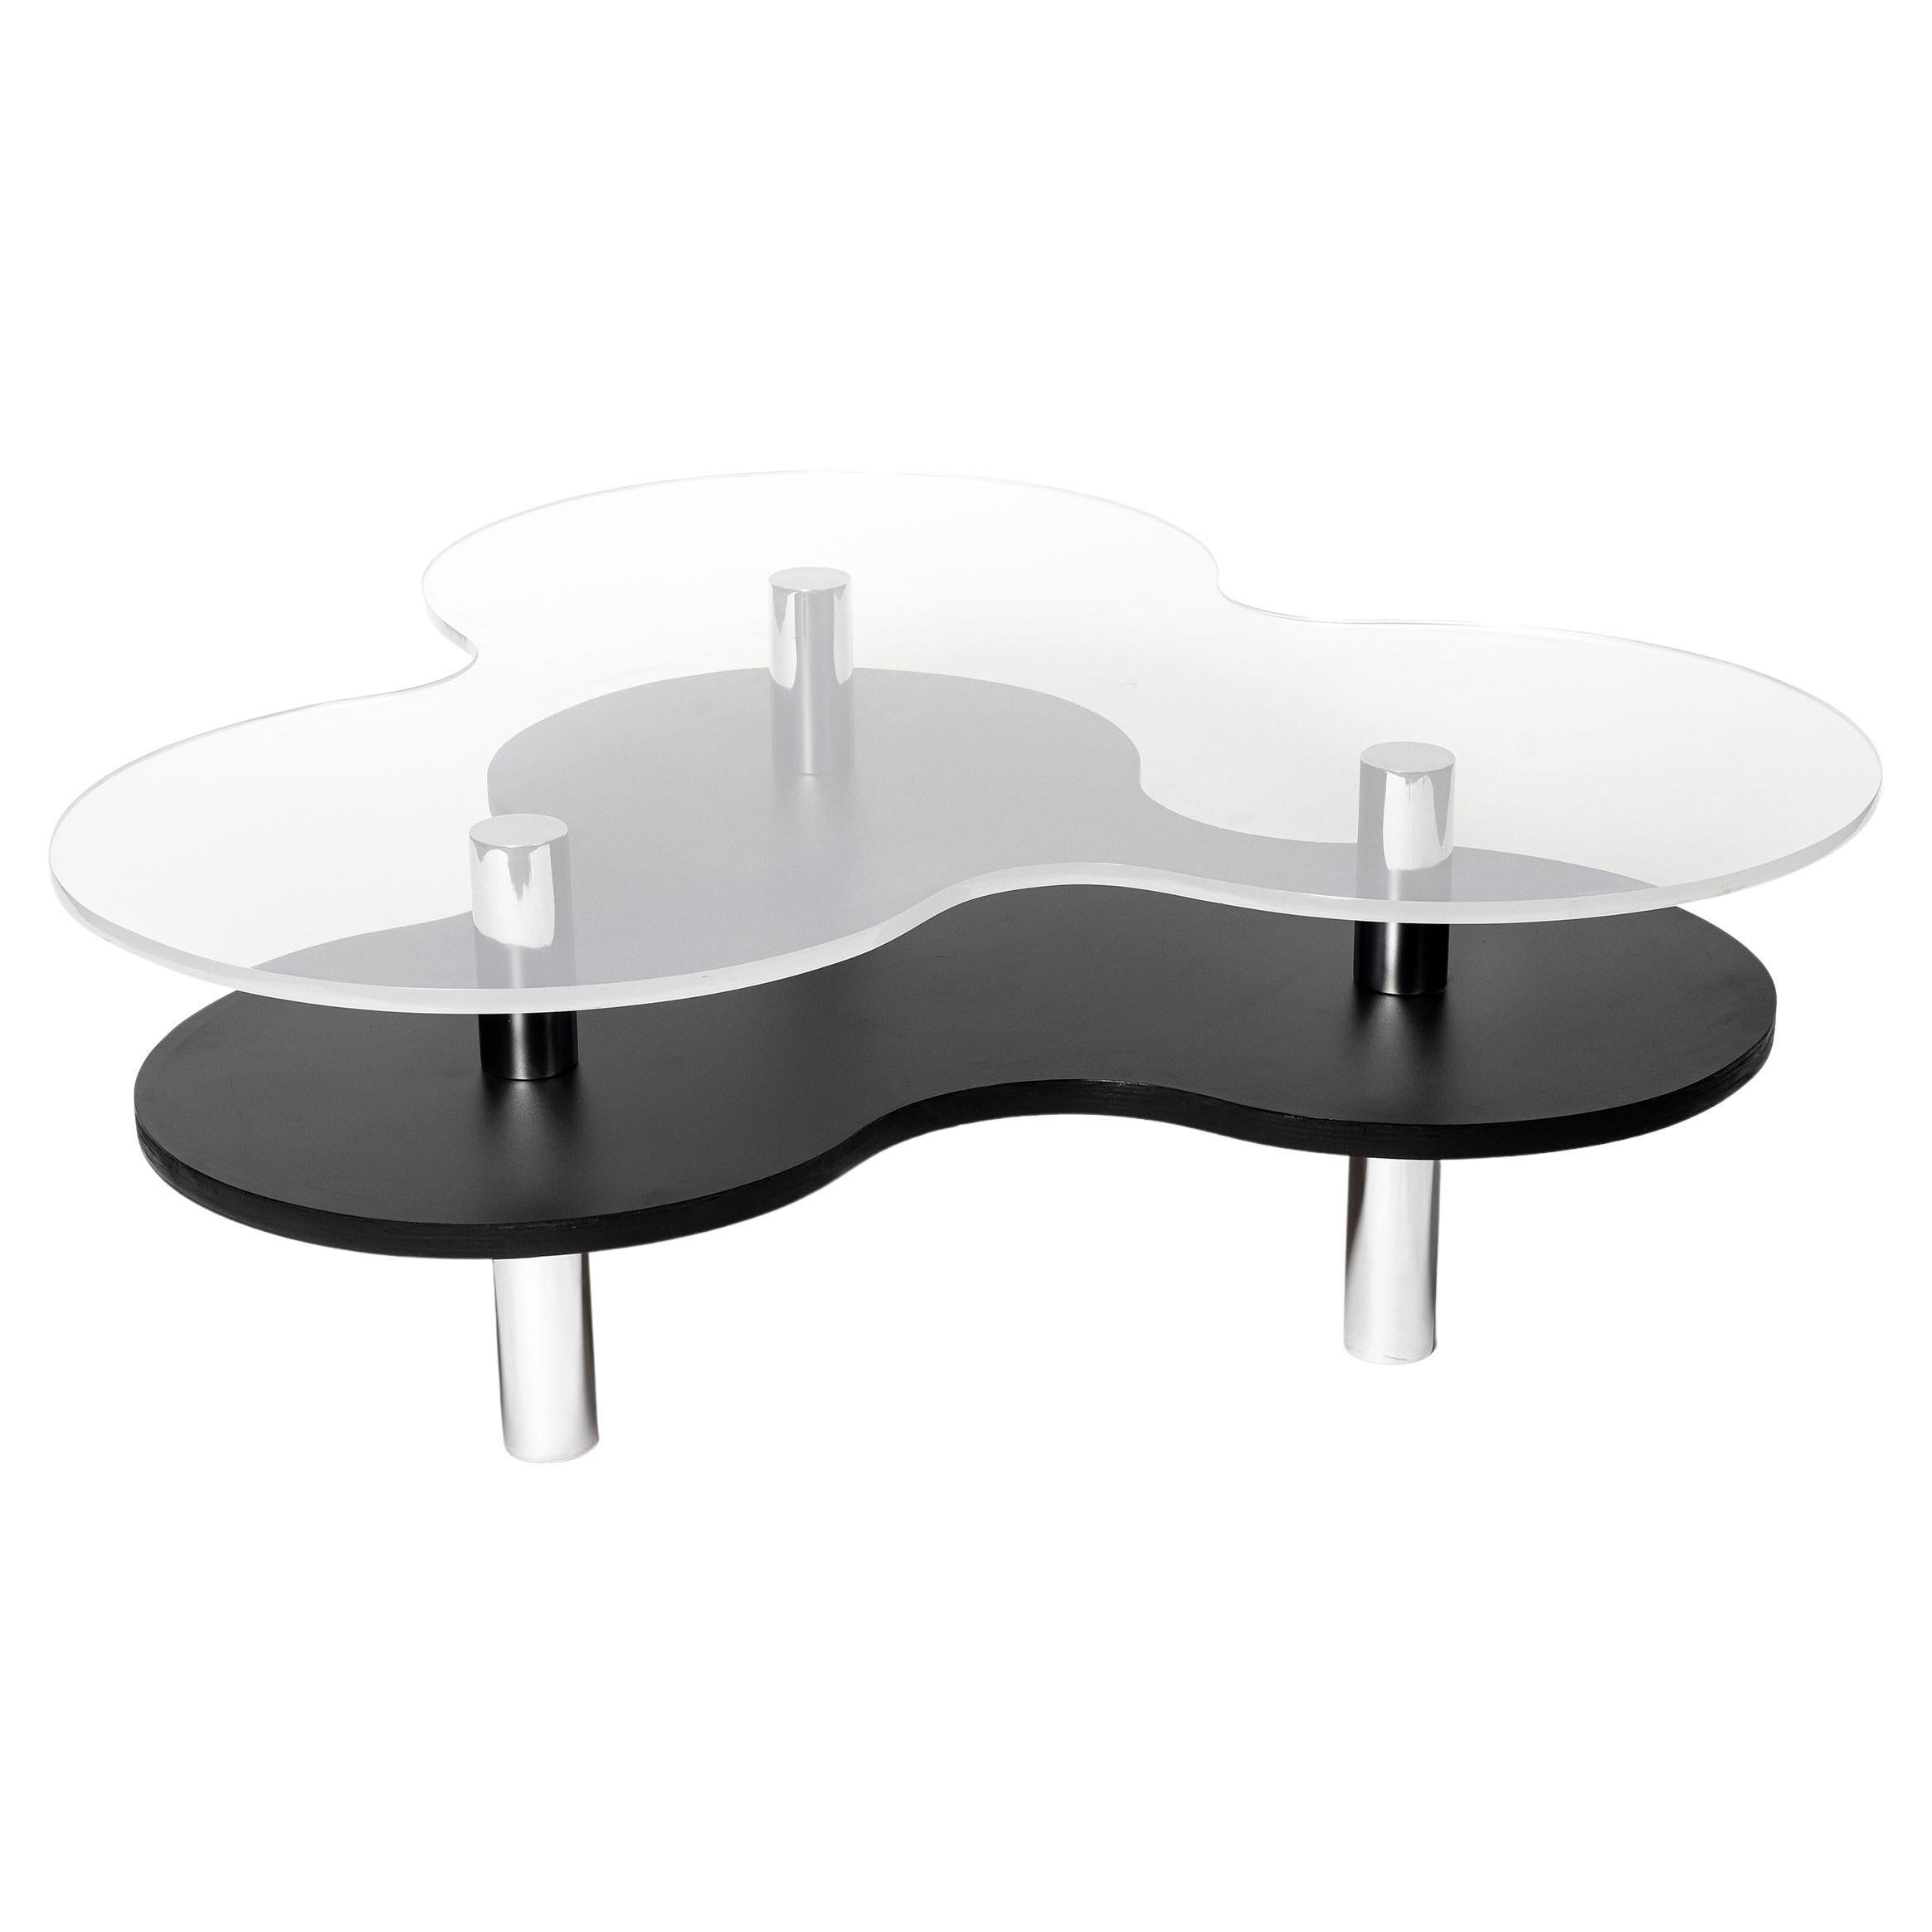 Wood, Formica, Acrylic and Chrome Metal Low Table, Italy, circa 1980